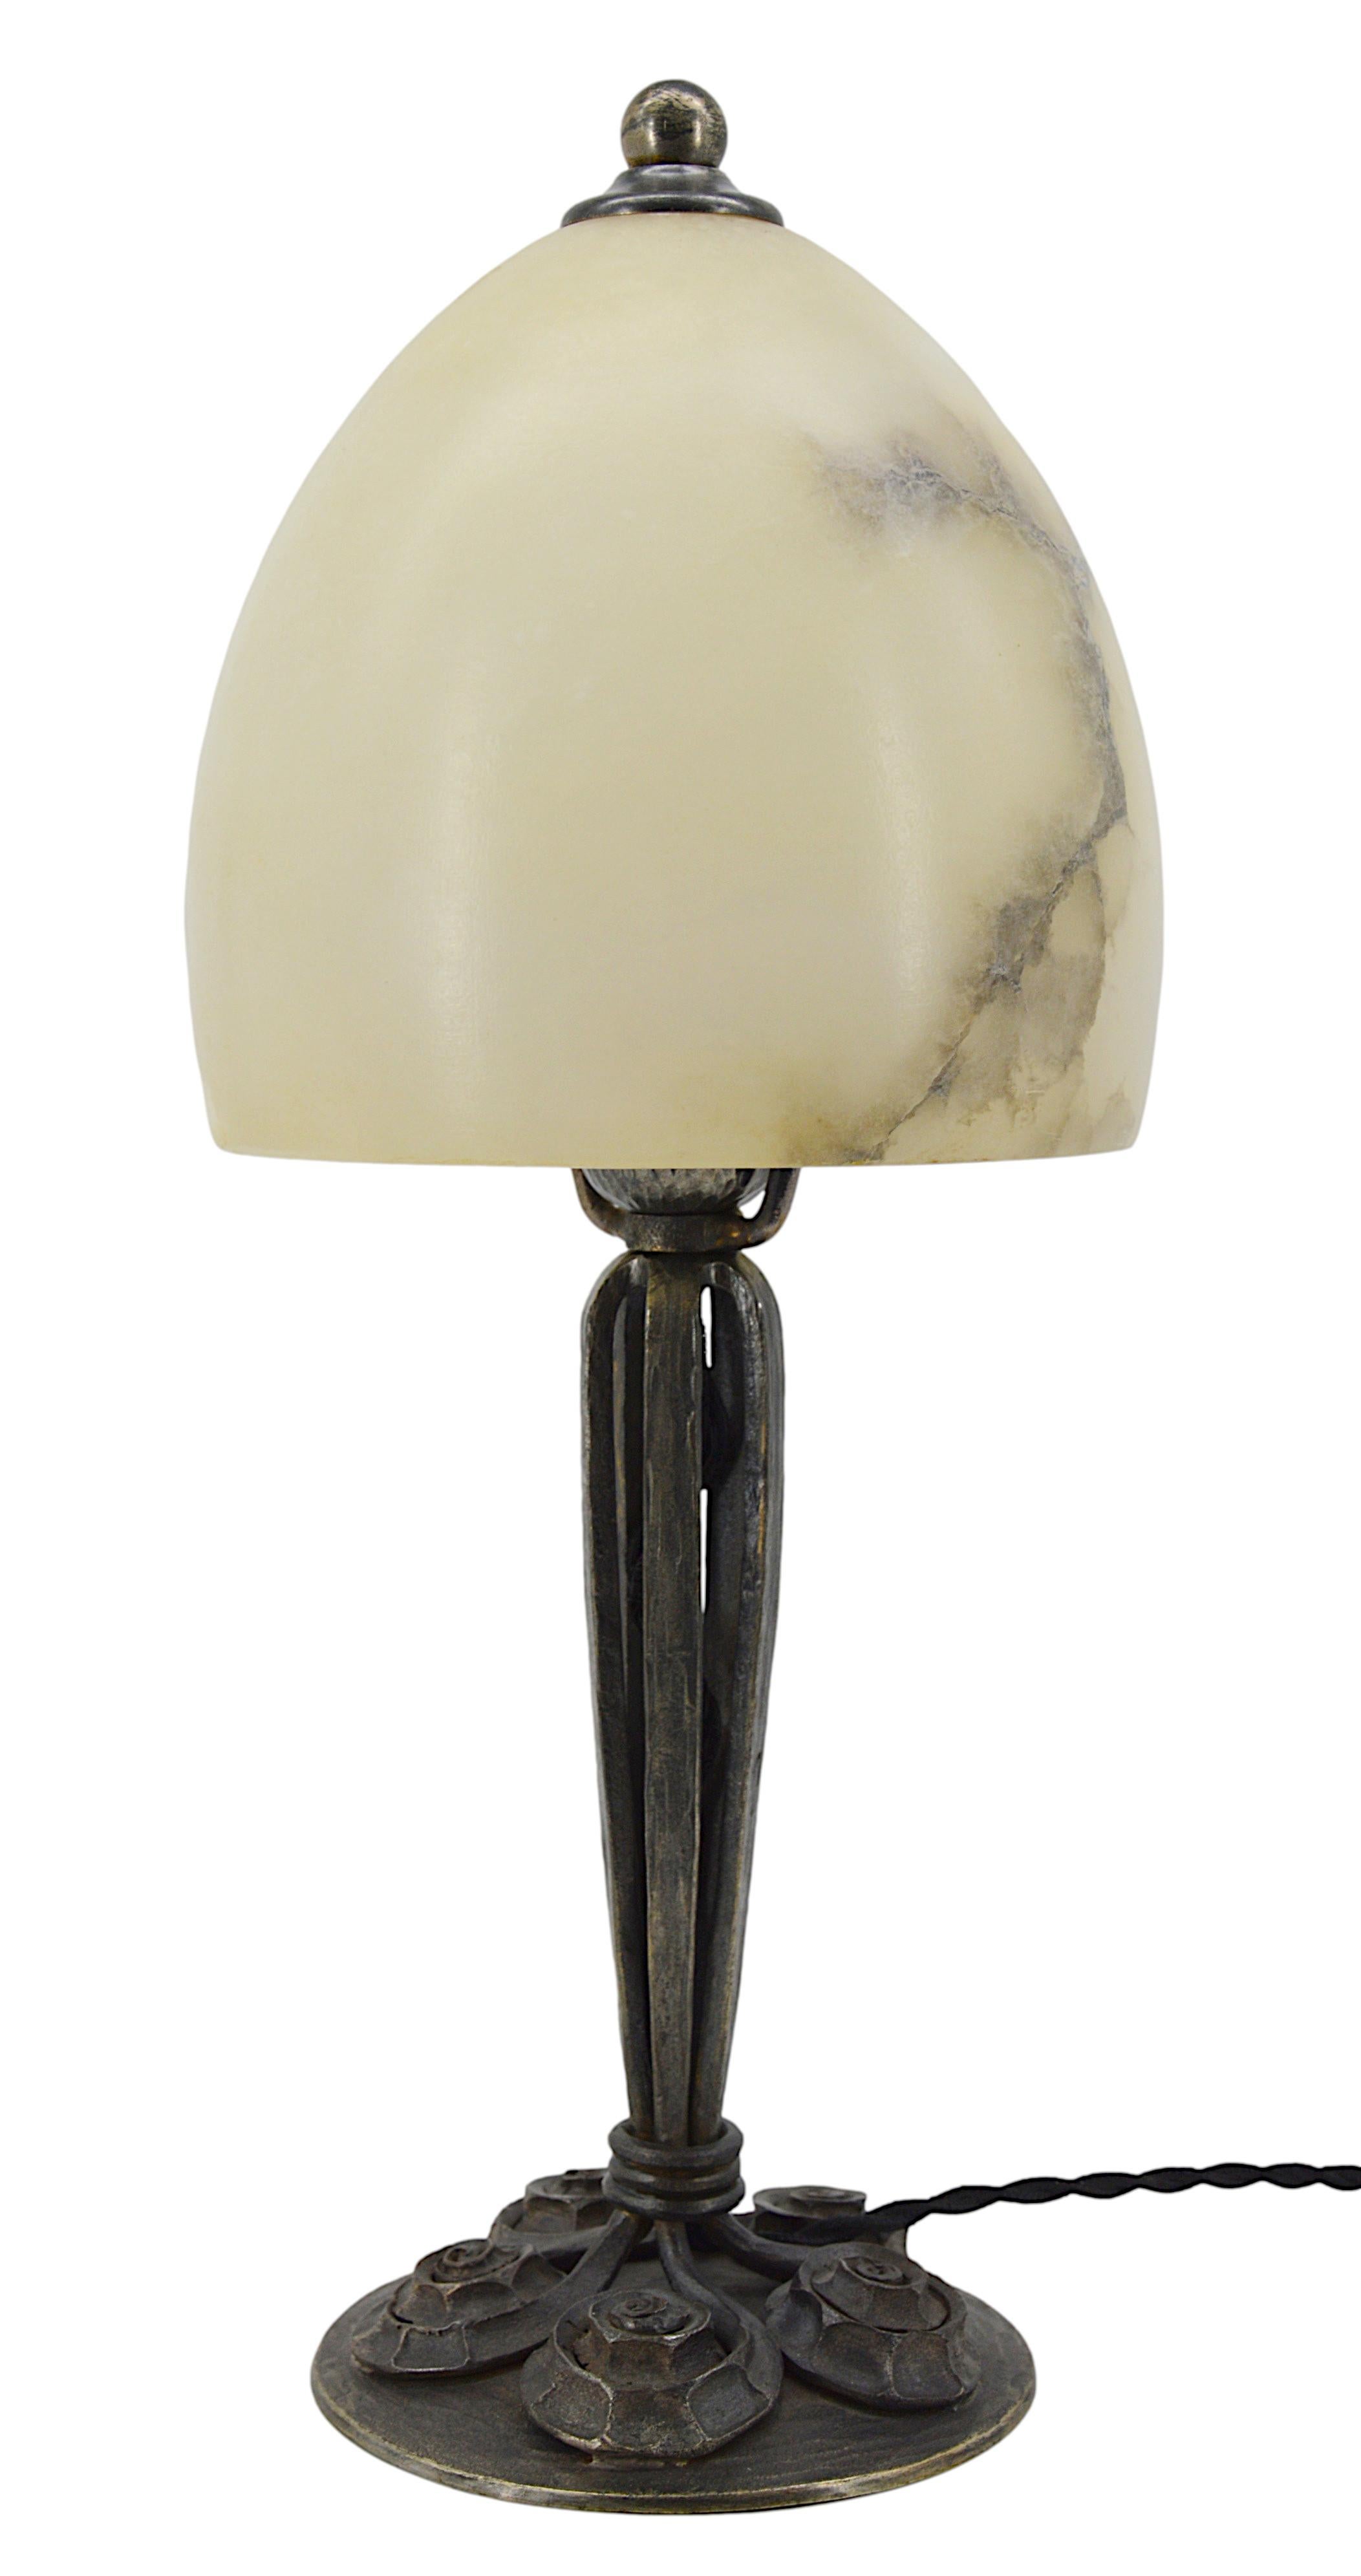 Edgar BRANDT French Art Deco Wrought-iron Table Lamp, 1920s For Sale 2